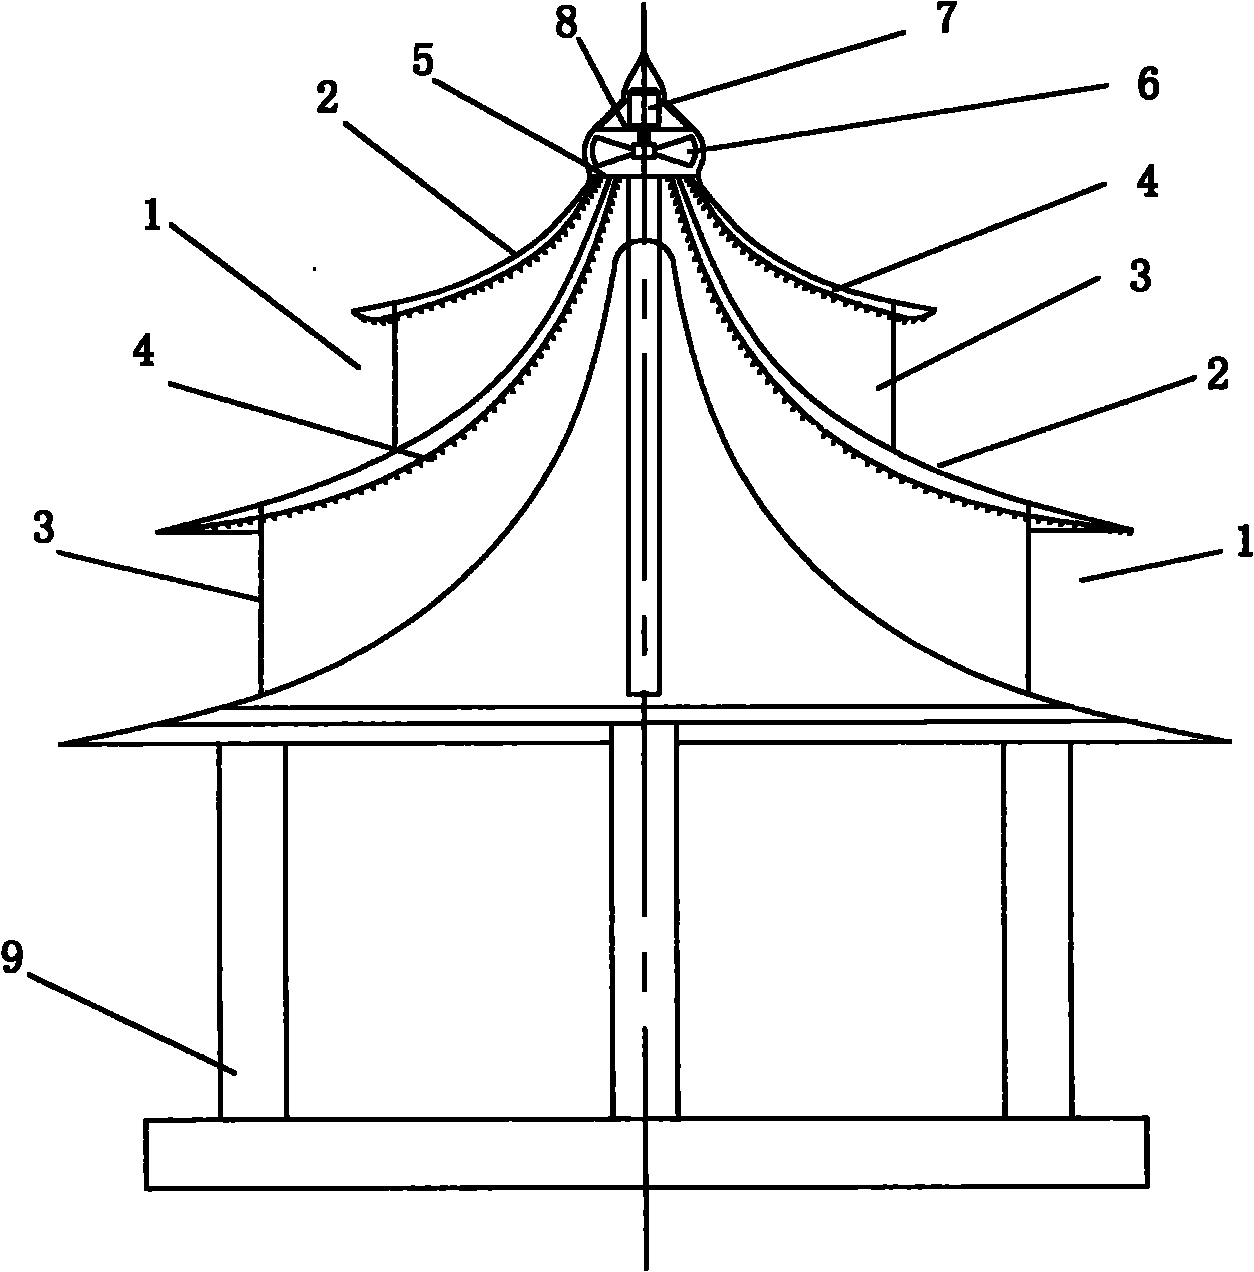 Tower-type solar-wind generating set and method